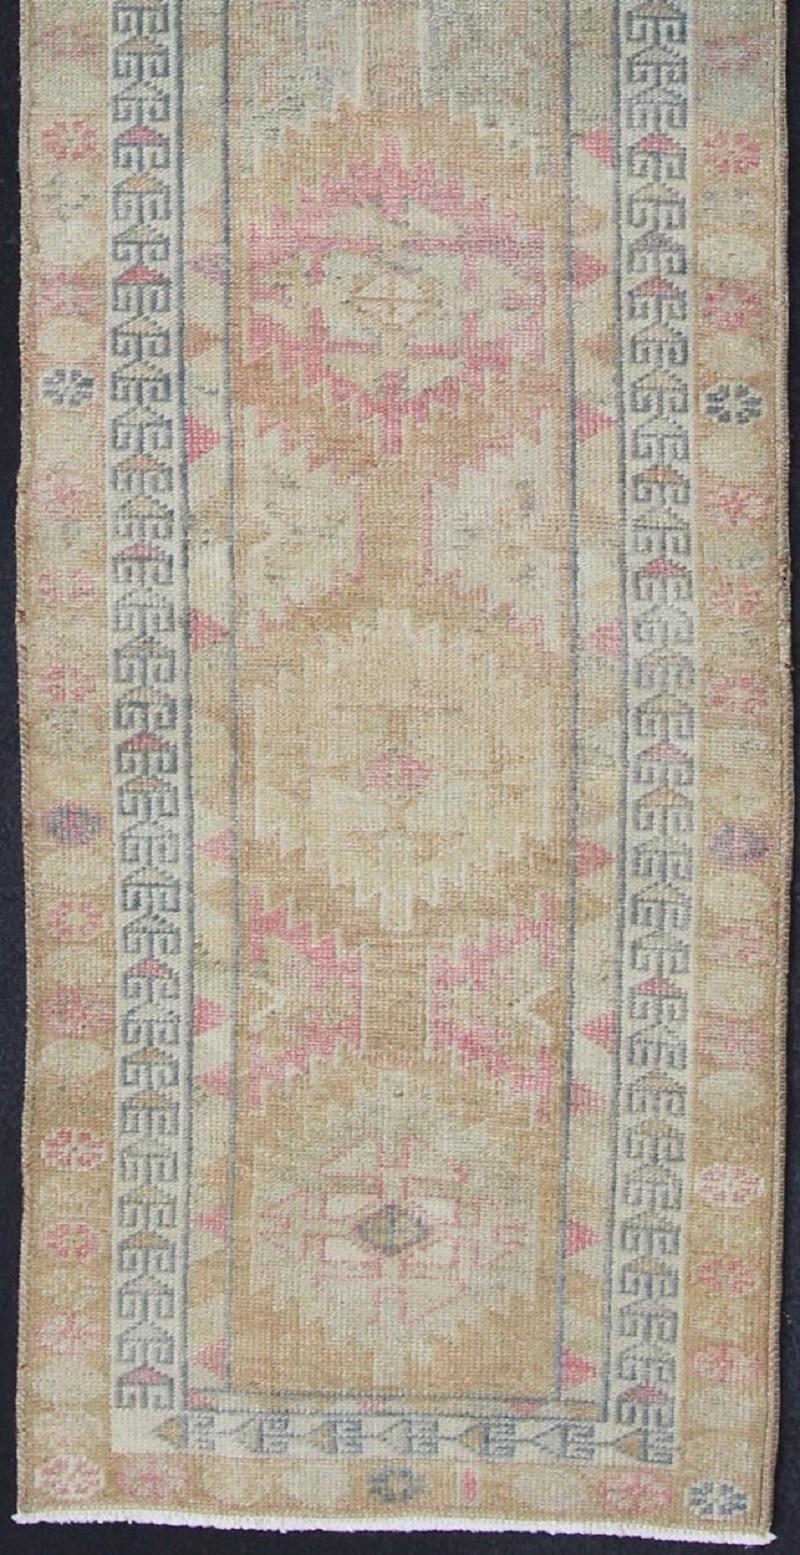 Oushak runner with tribal motifs in blue and pink, rug en-165353, country of origin / type: Turkey / Oushak, circa 1960

This Oushak runner from Turkey is characterized by a neutral-toned background and an assortment of tribal designs and flowers in